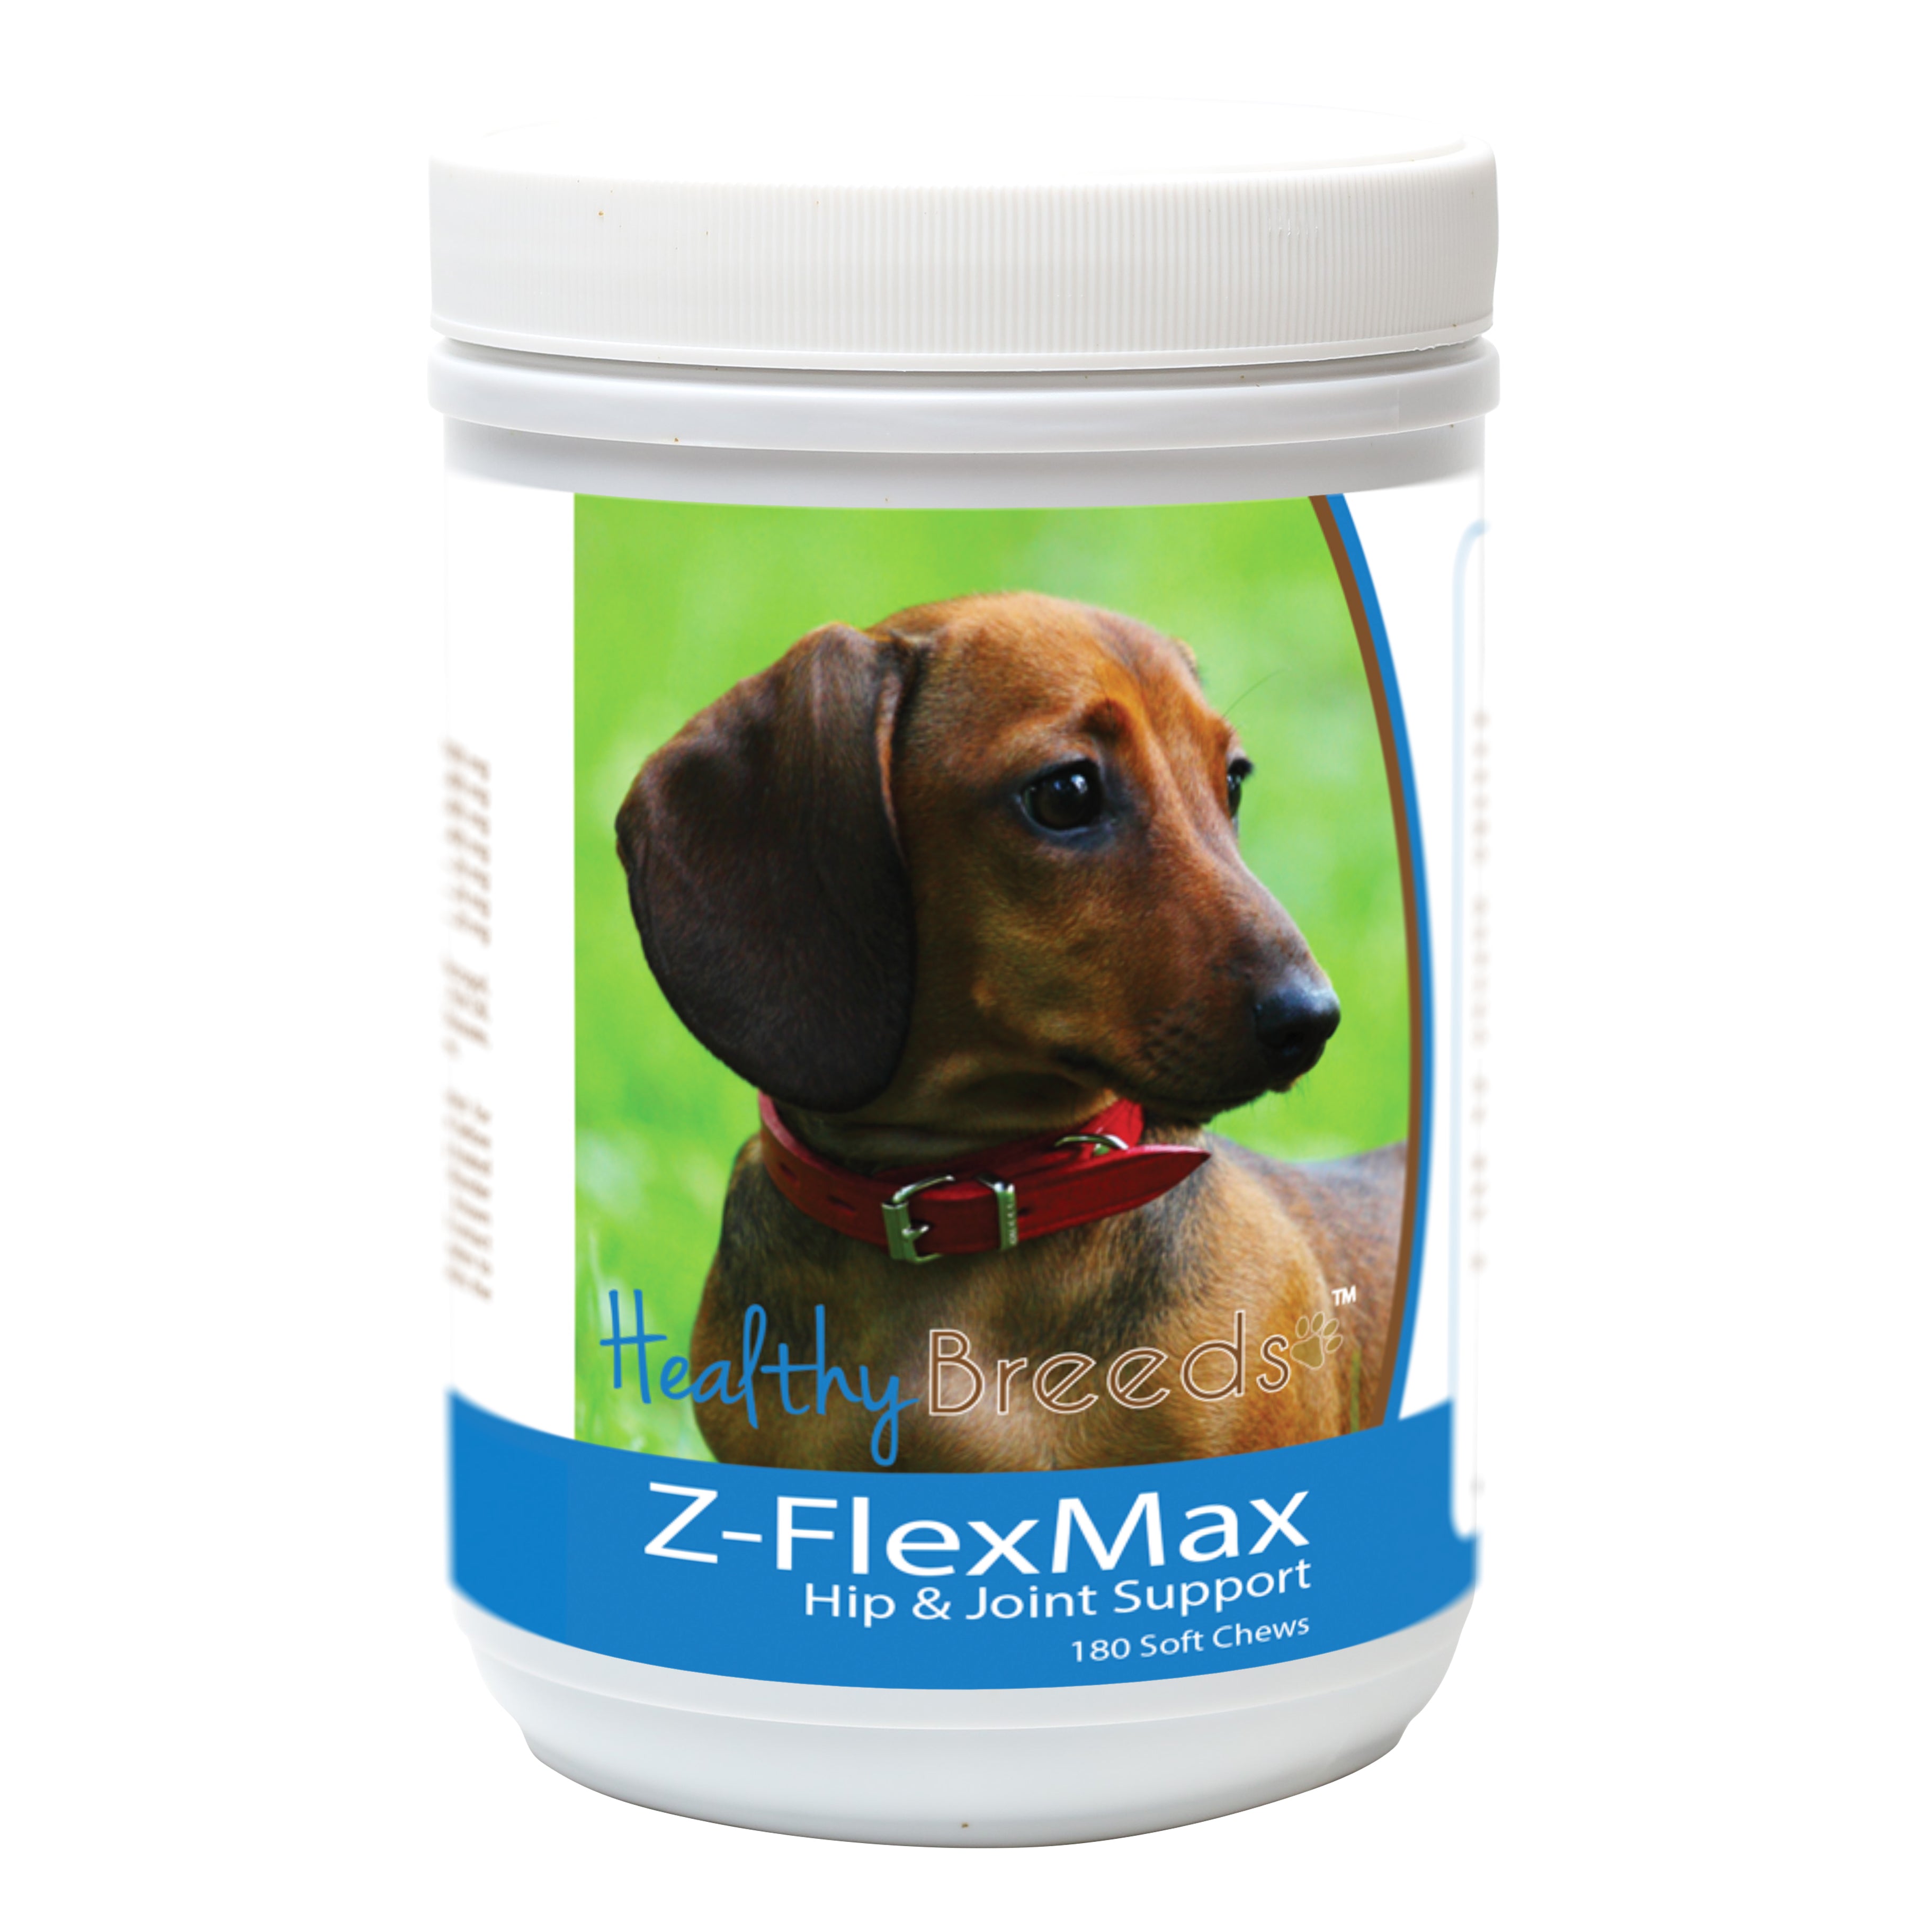 Dachshund Z-Flex Max Dog Hip and Joint Support 180 Count